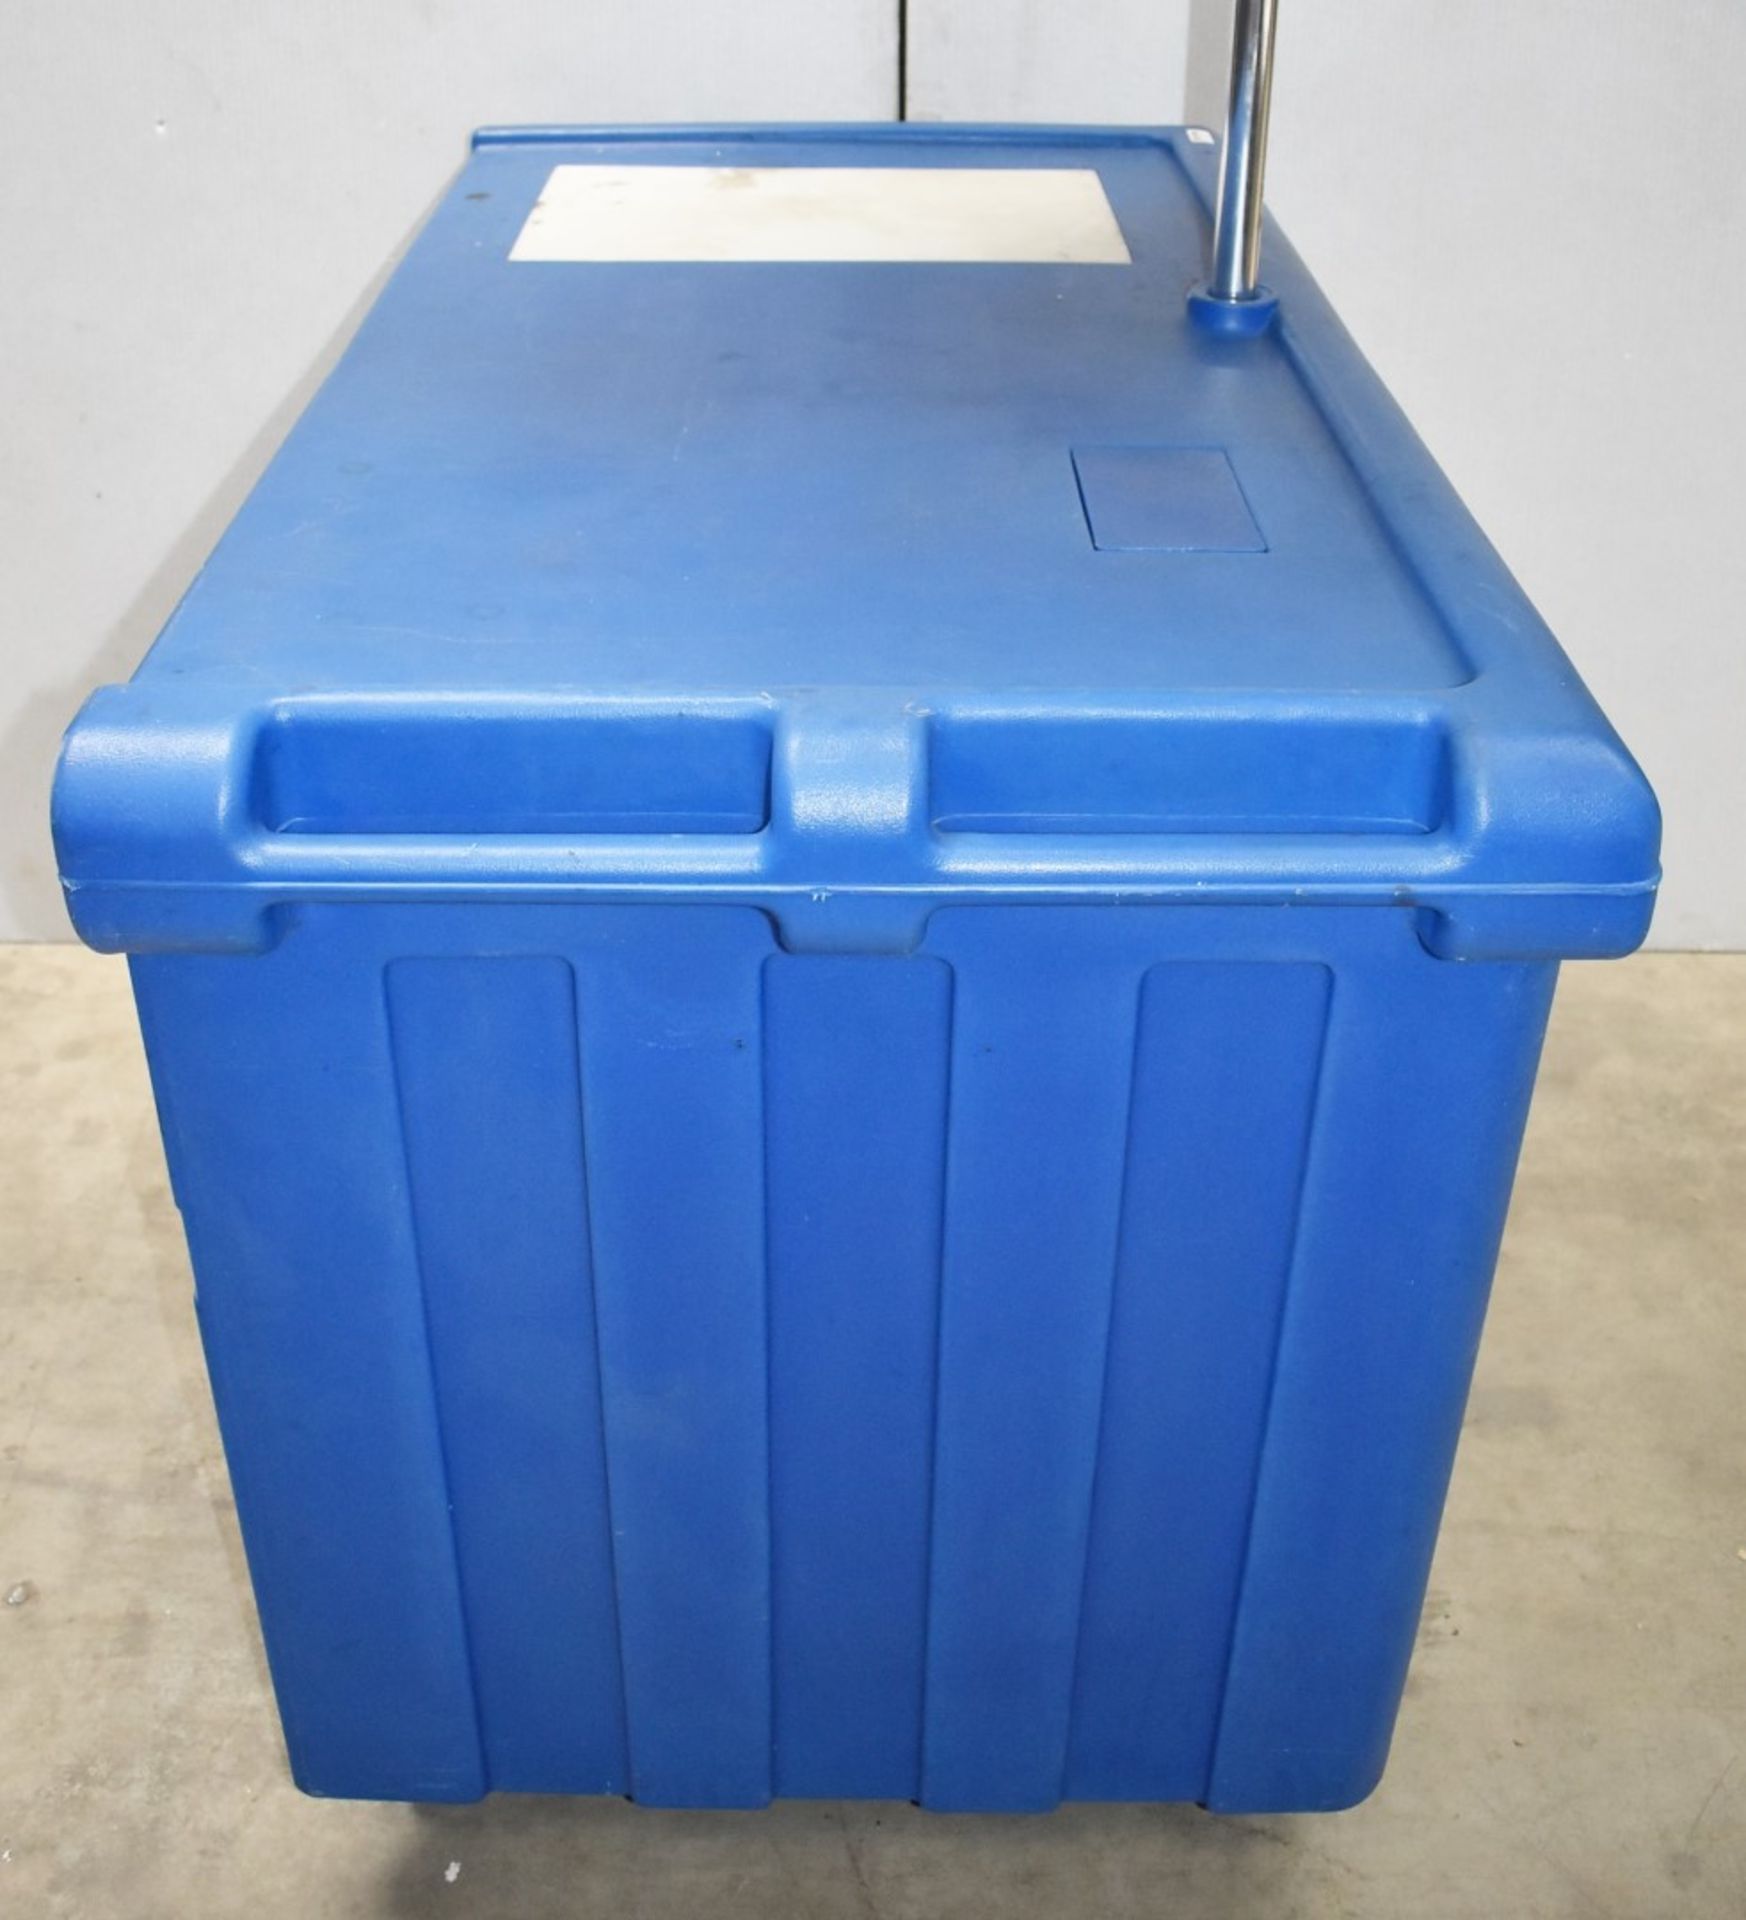 1 x Cambro Mobile BBQ Food Station With Parasol - Lightweight Plastic Design With Storage - Image 3 of 14